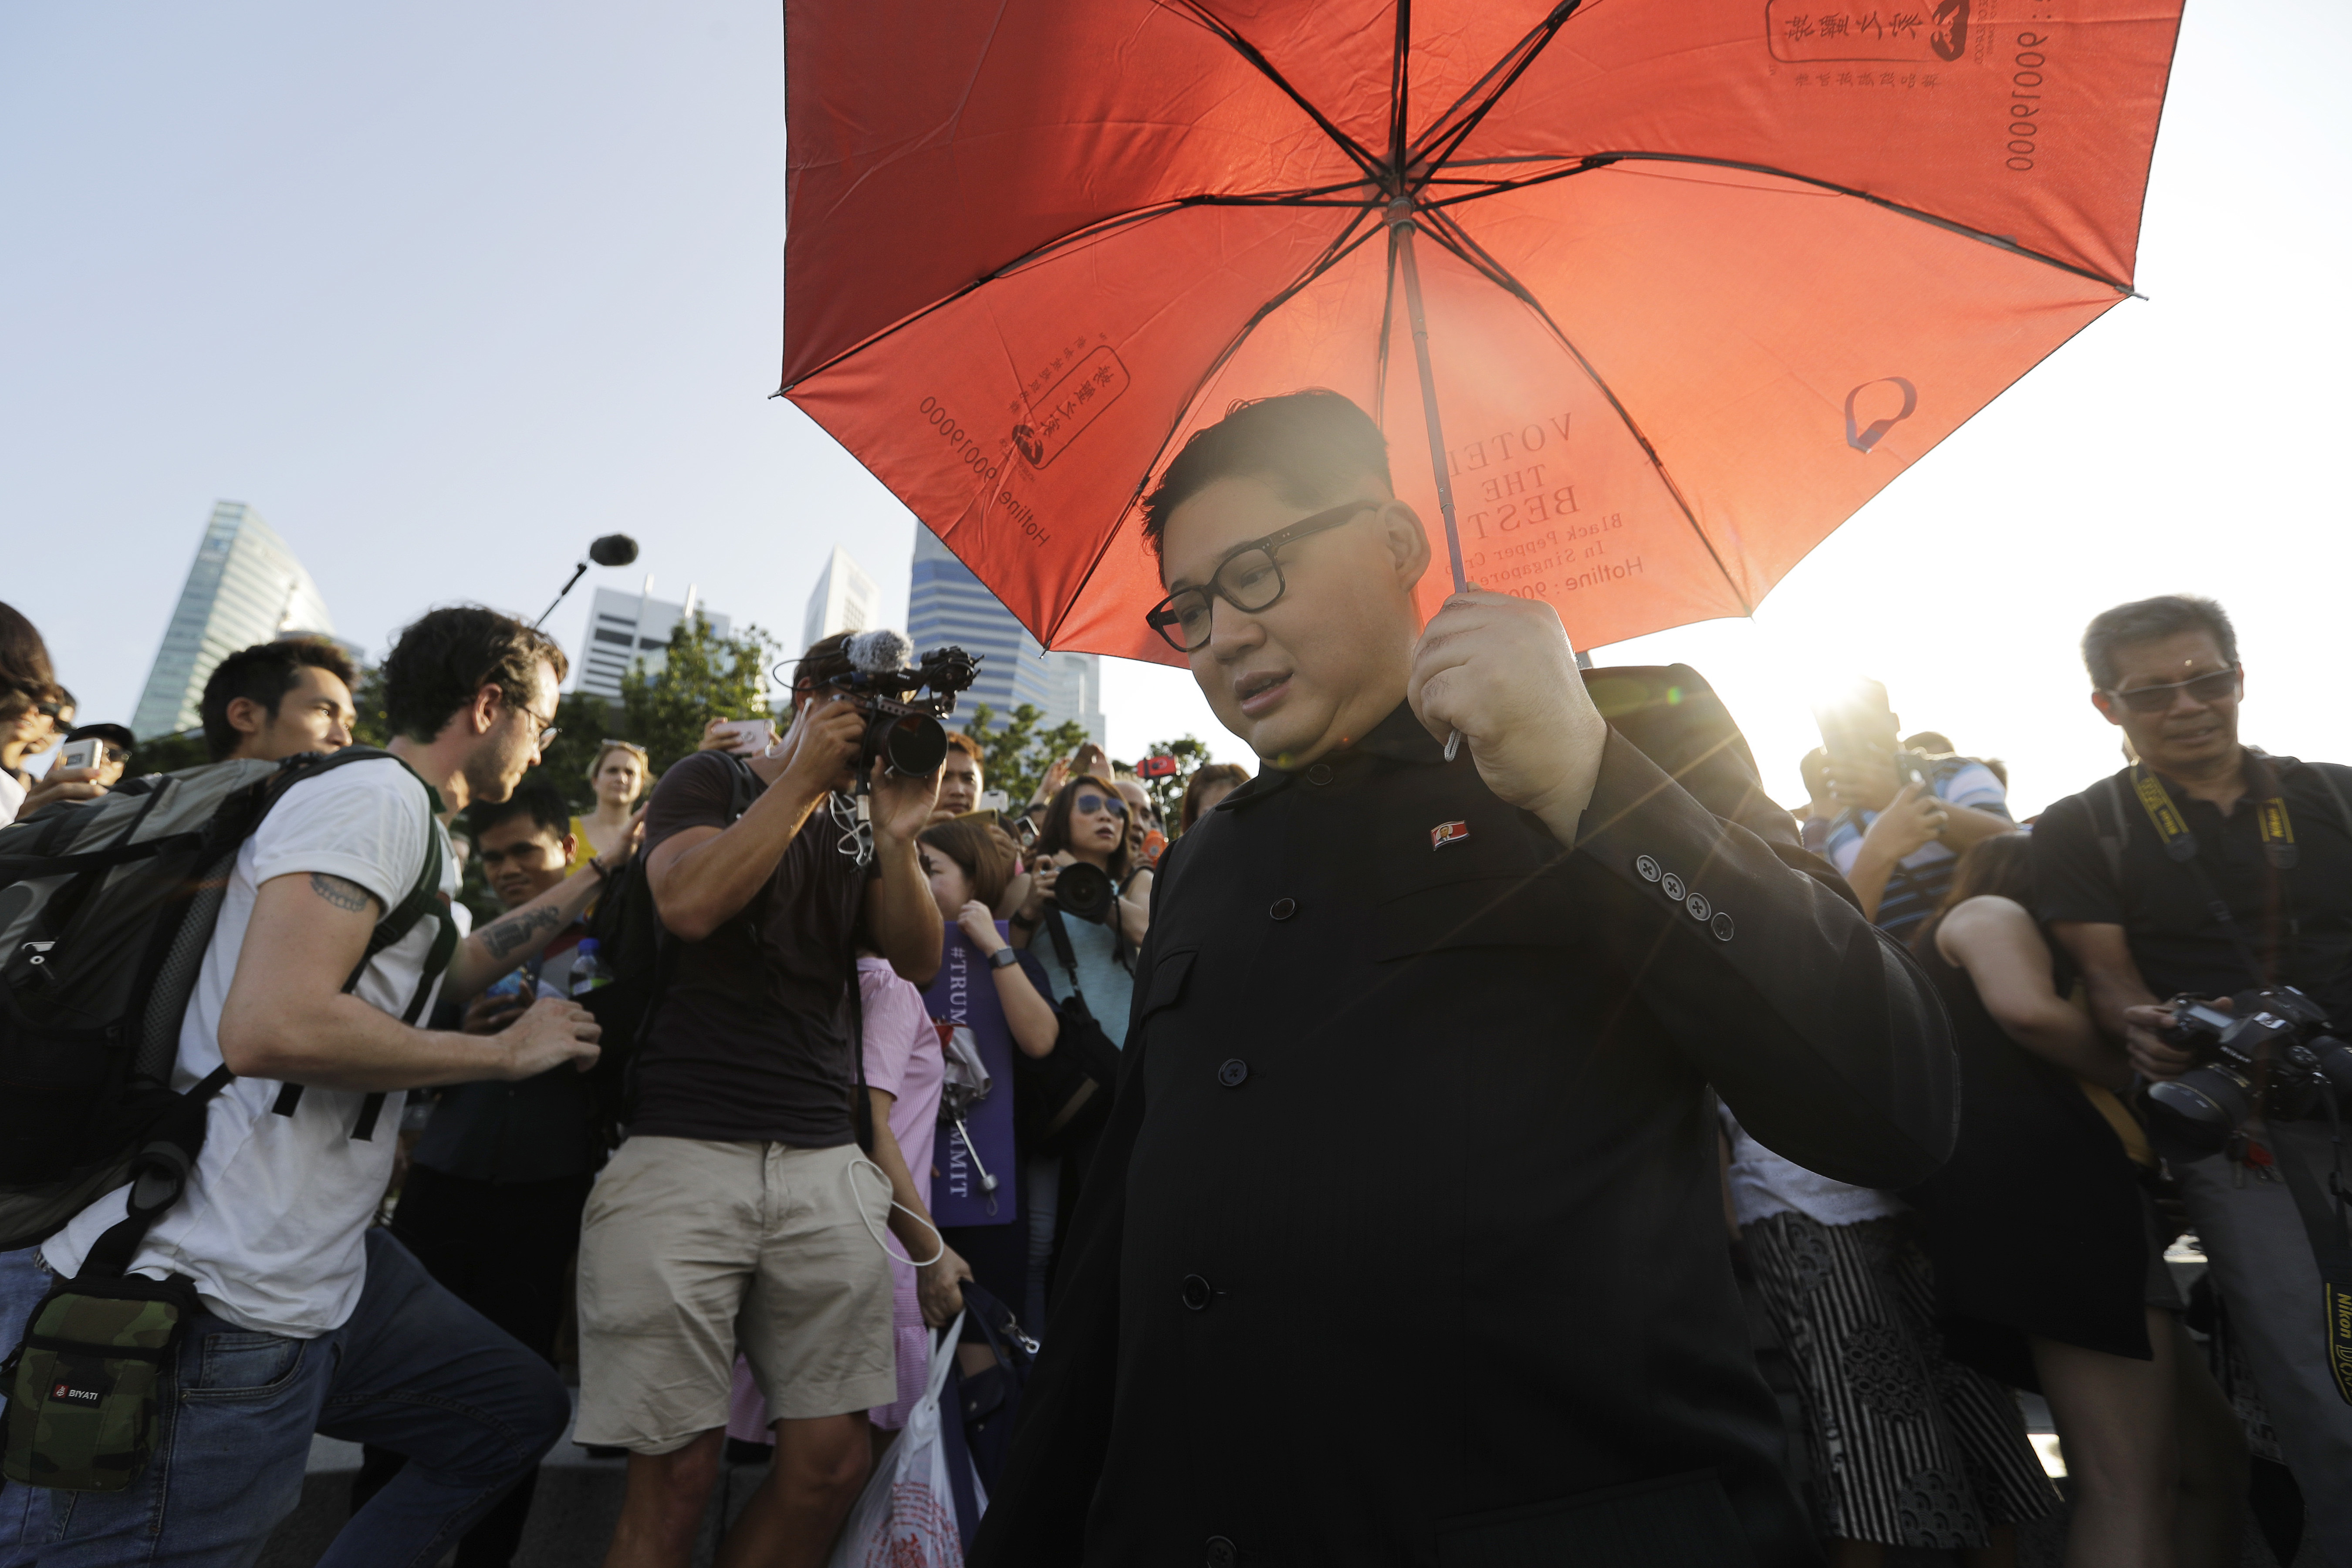 In this June 8, 2018, photo, Kim Jong Un impersonator, Howard X, who was questioned by police when he arrived at Singapore's Changi Airport is swamped by members of the media and curious onlookers as he visited the Merlion Park, a popular tourist destination in Singapore. The small island nation of Singapore, which prides itself on law and order, is feeling the pressure of more than 3,000 members of the press arriving for a historic summit between President Donald Trump and North Korean leader Kim Jong Un. Apart from journalists, authorities also have to contend with Kim and Trump impersonators. (AP Photo/Wong Maye-E)